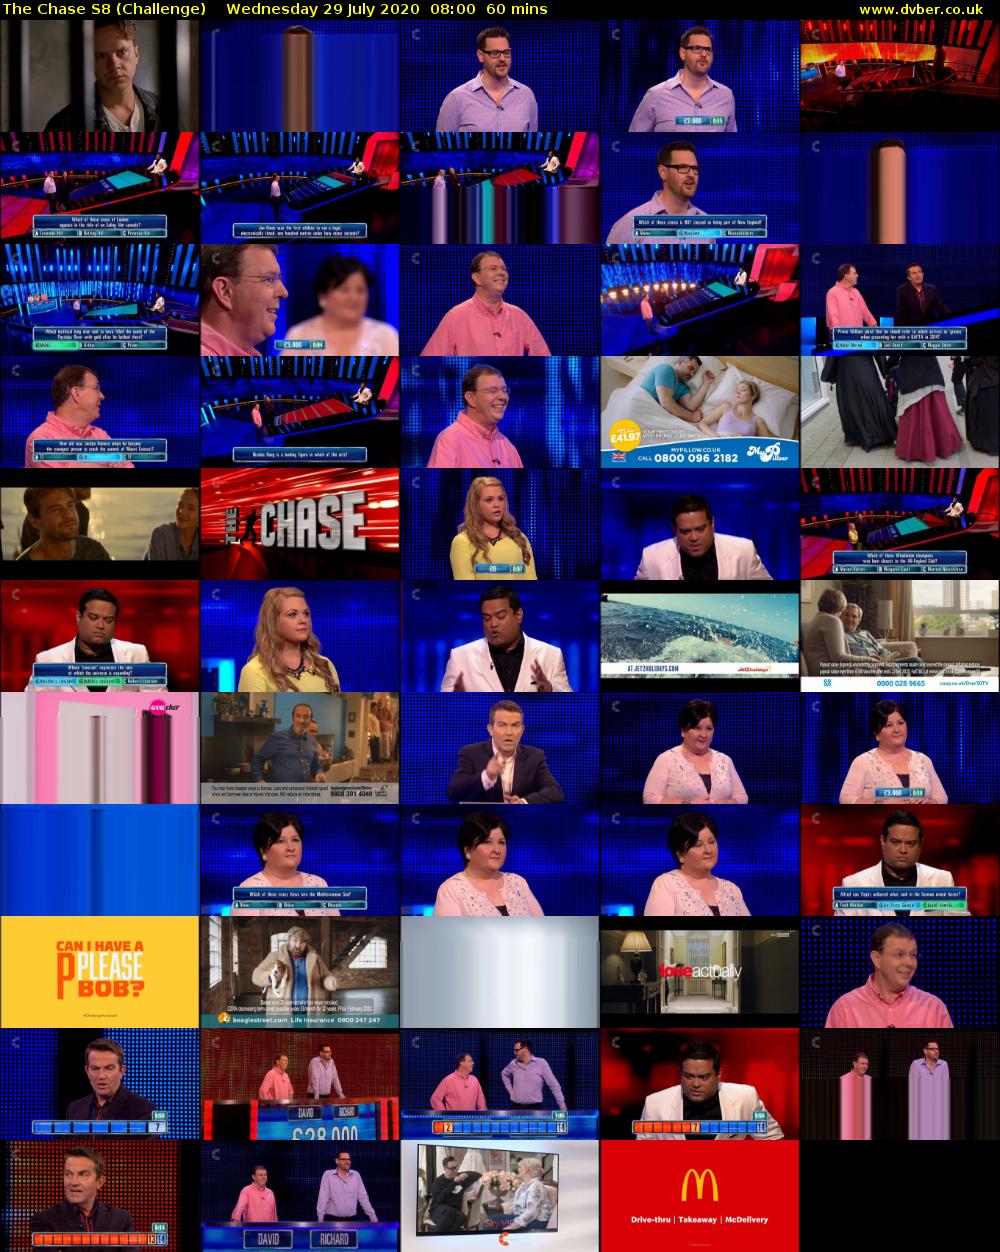 The Chase S8 (Challenge) Wednesday 29 July 2020 08:00 - 09:00